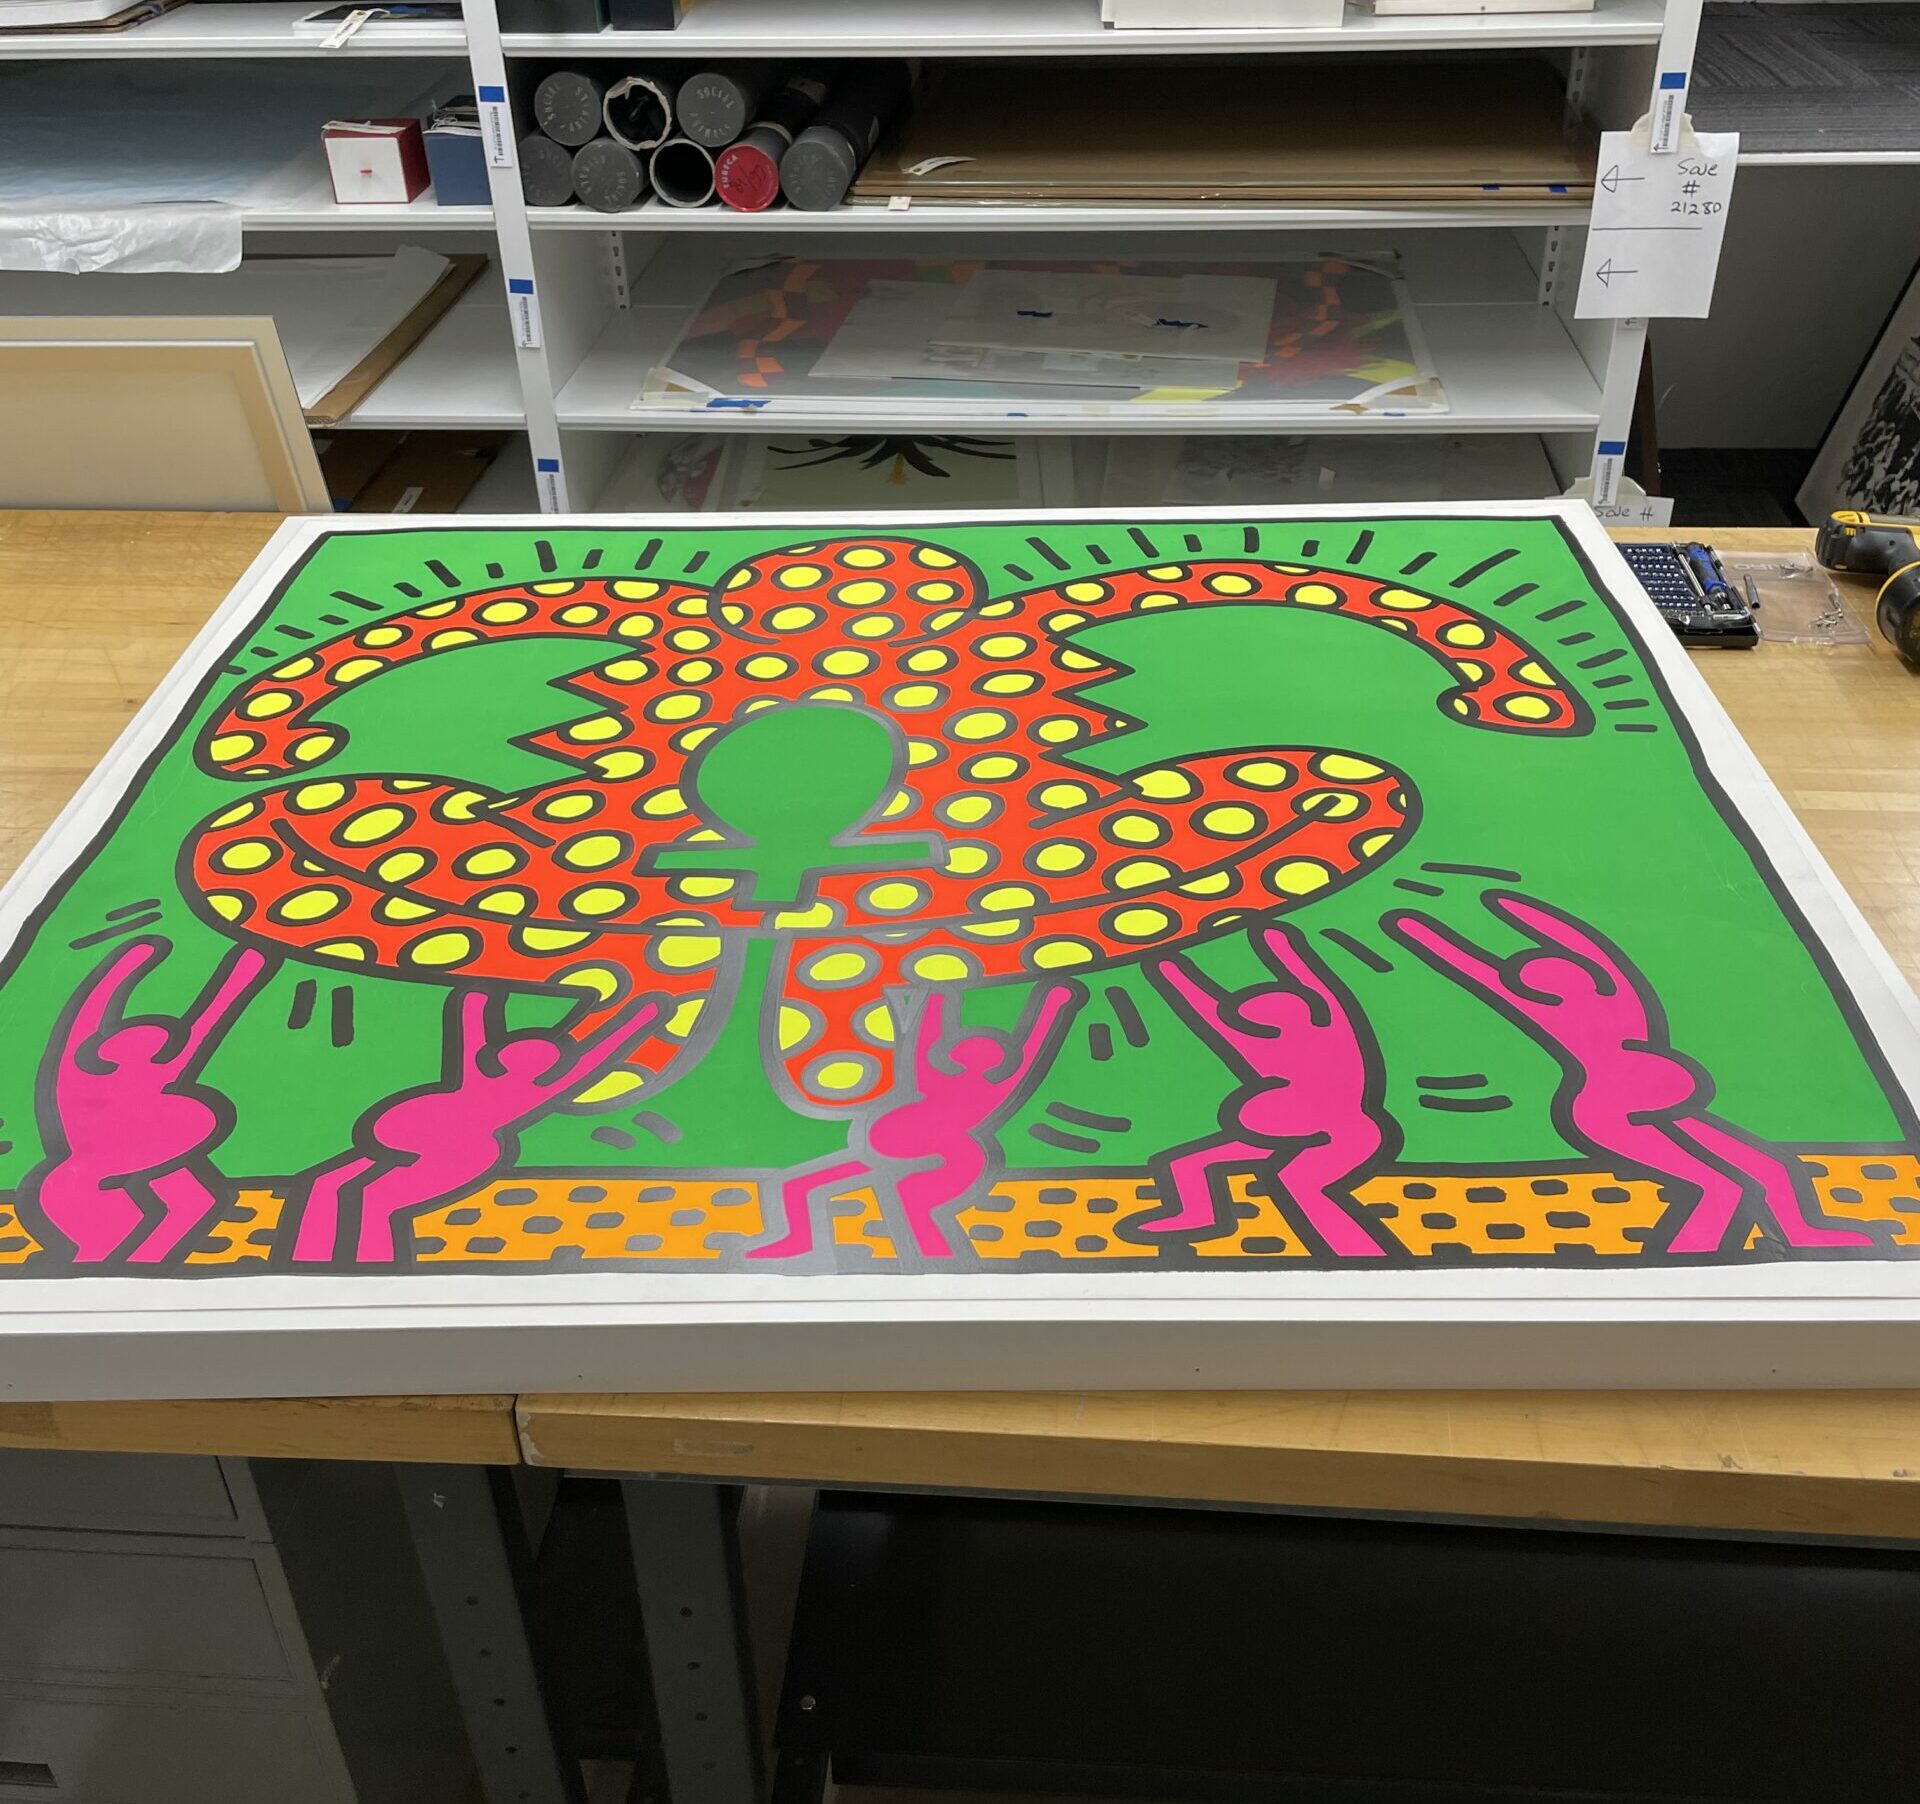 Untitled 9 print by Keith Haring out of frame